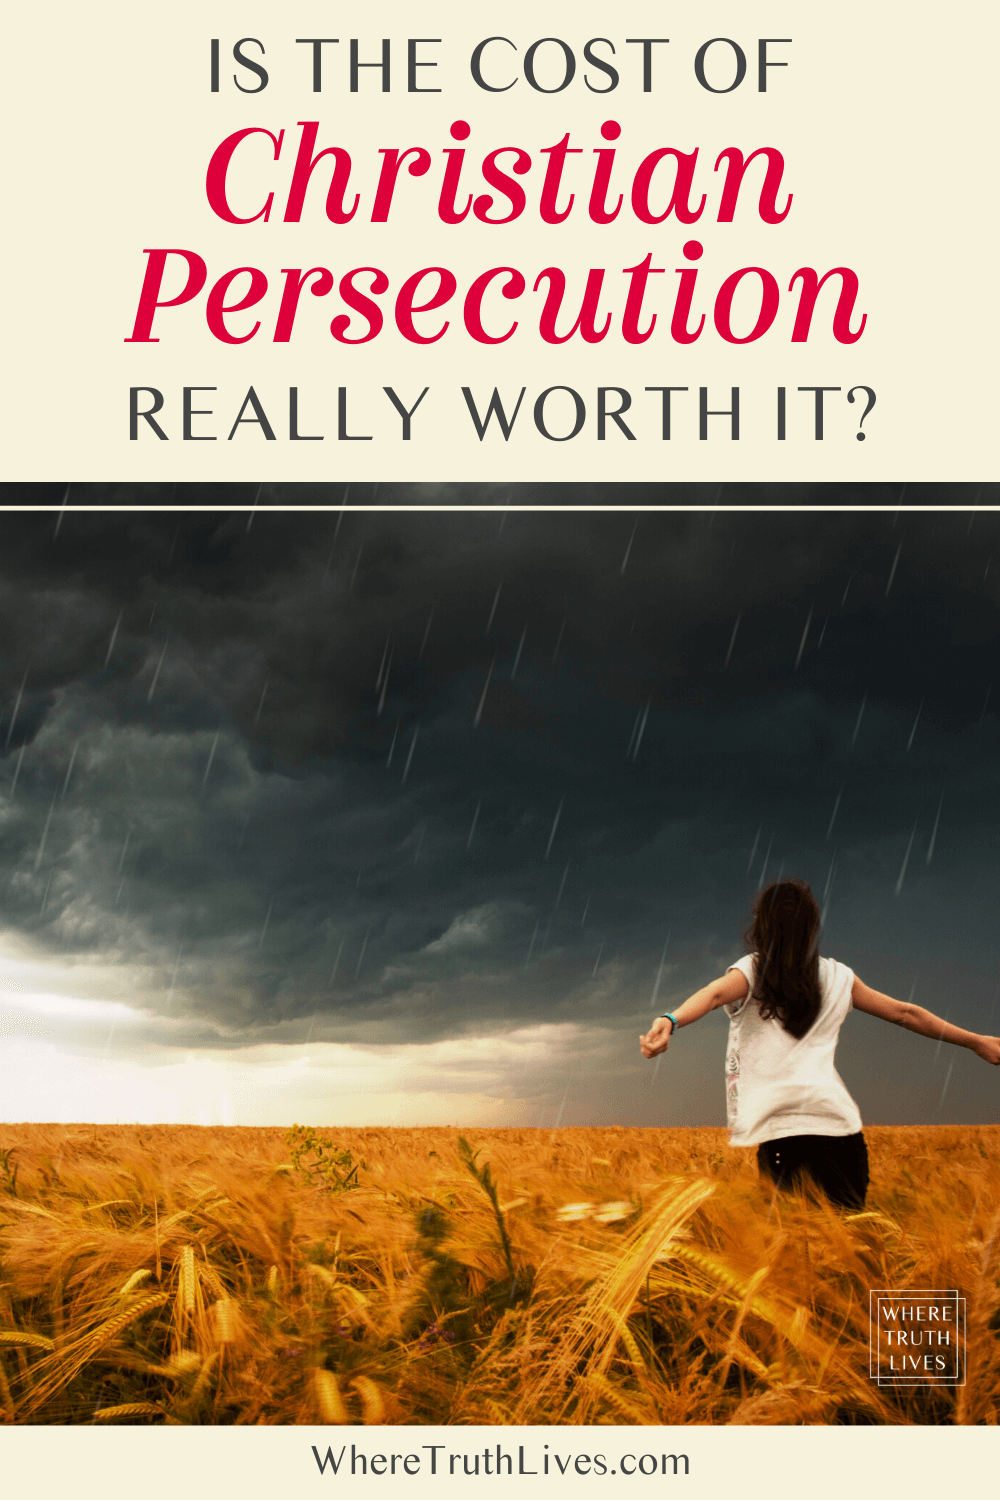 Is The Cost of Christian Persecution Really Worth It? | Where Truth Lives .com | Christian blog post, persecuted for faith